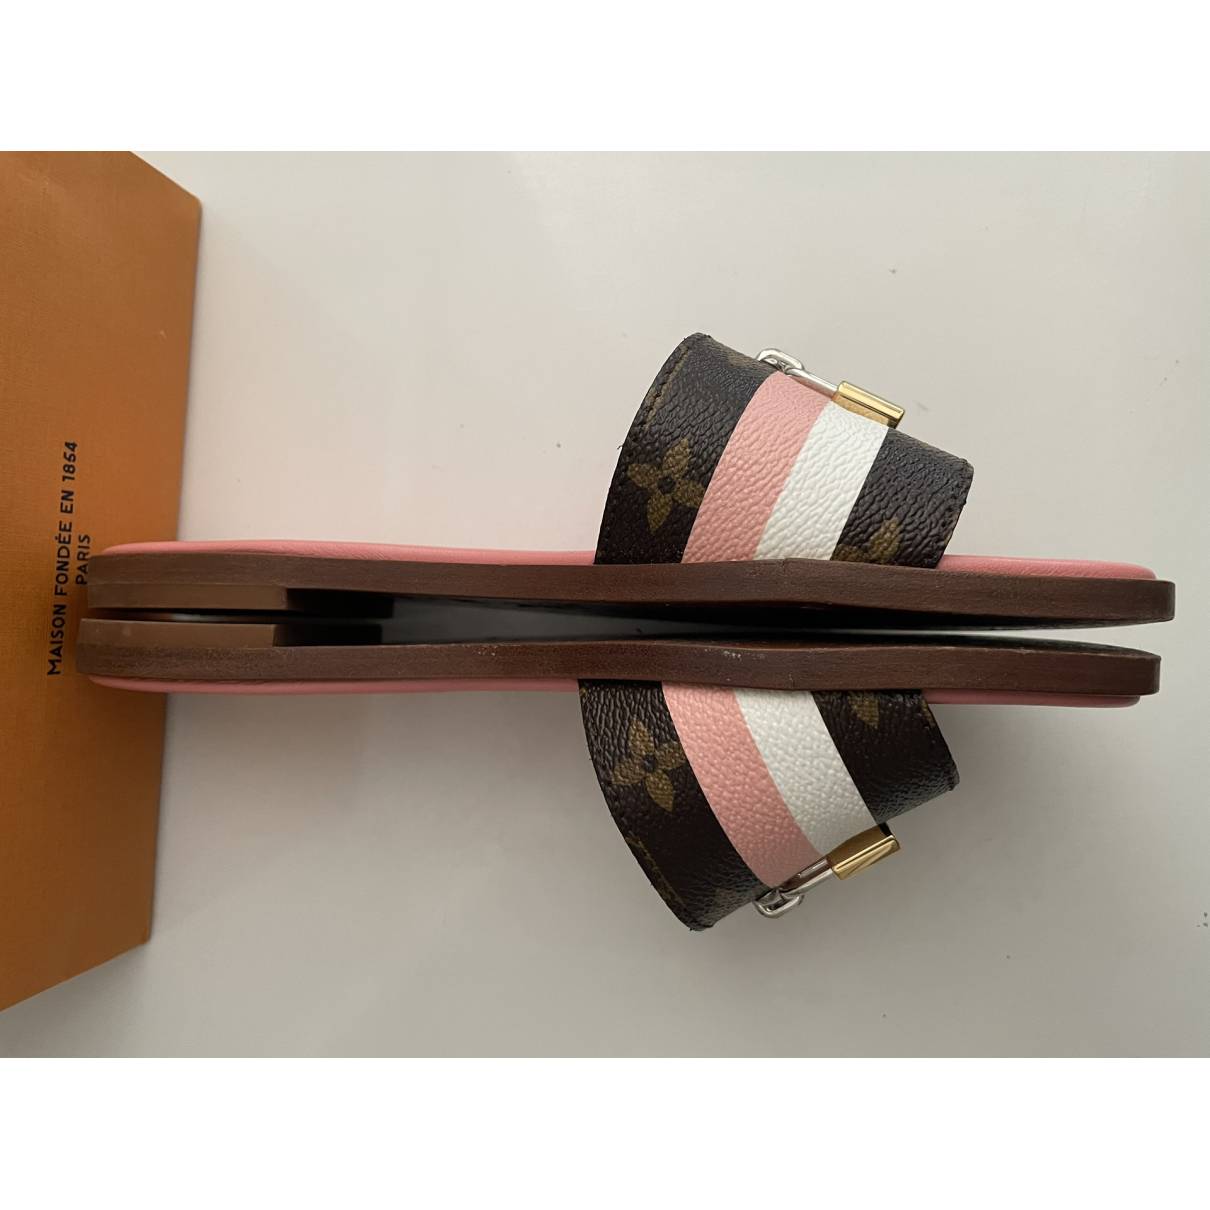 Louis Vuitton - Authenticated Lock It Sandal - Leather Multicolour for Women, Very Good Condition